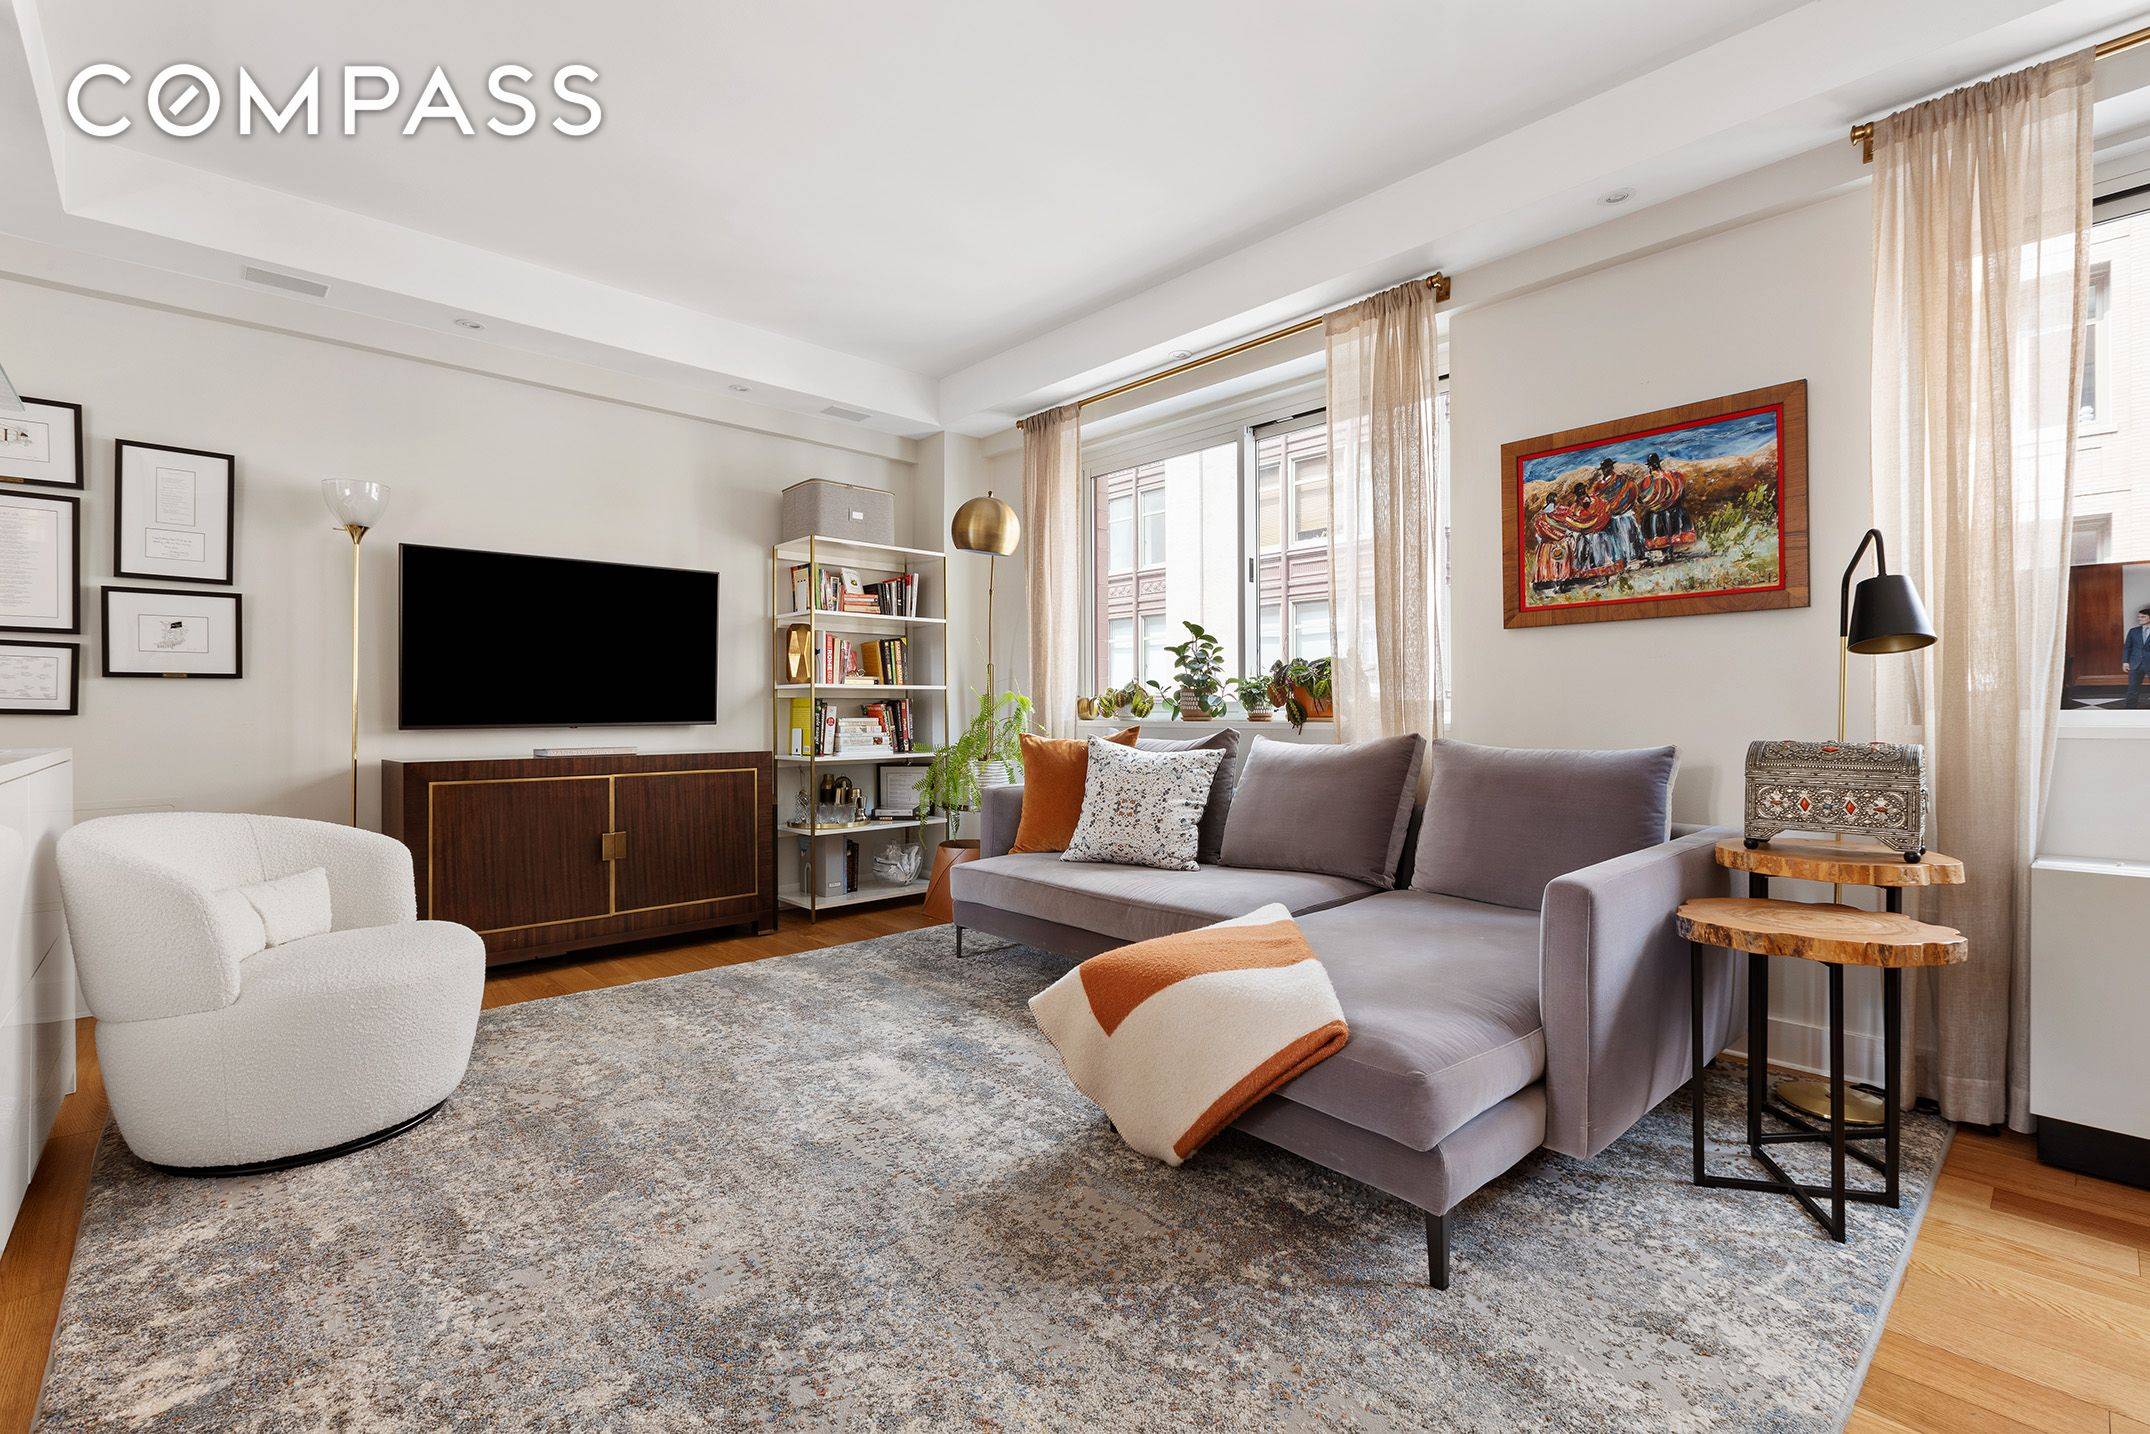 Unit 5B at 200 West 24th Street is the perfect combination of luxury and convenience in the heart of Chelsea.